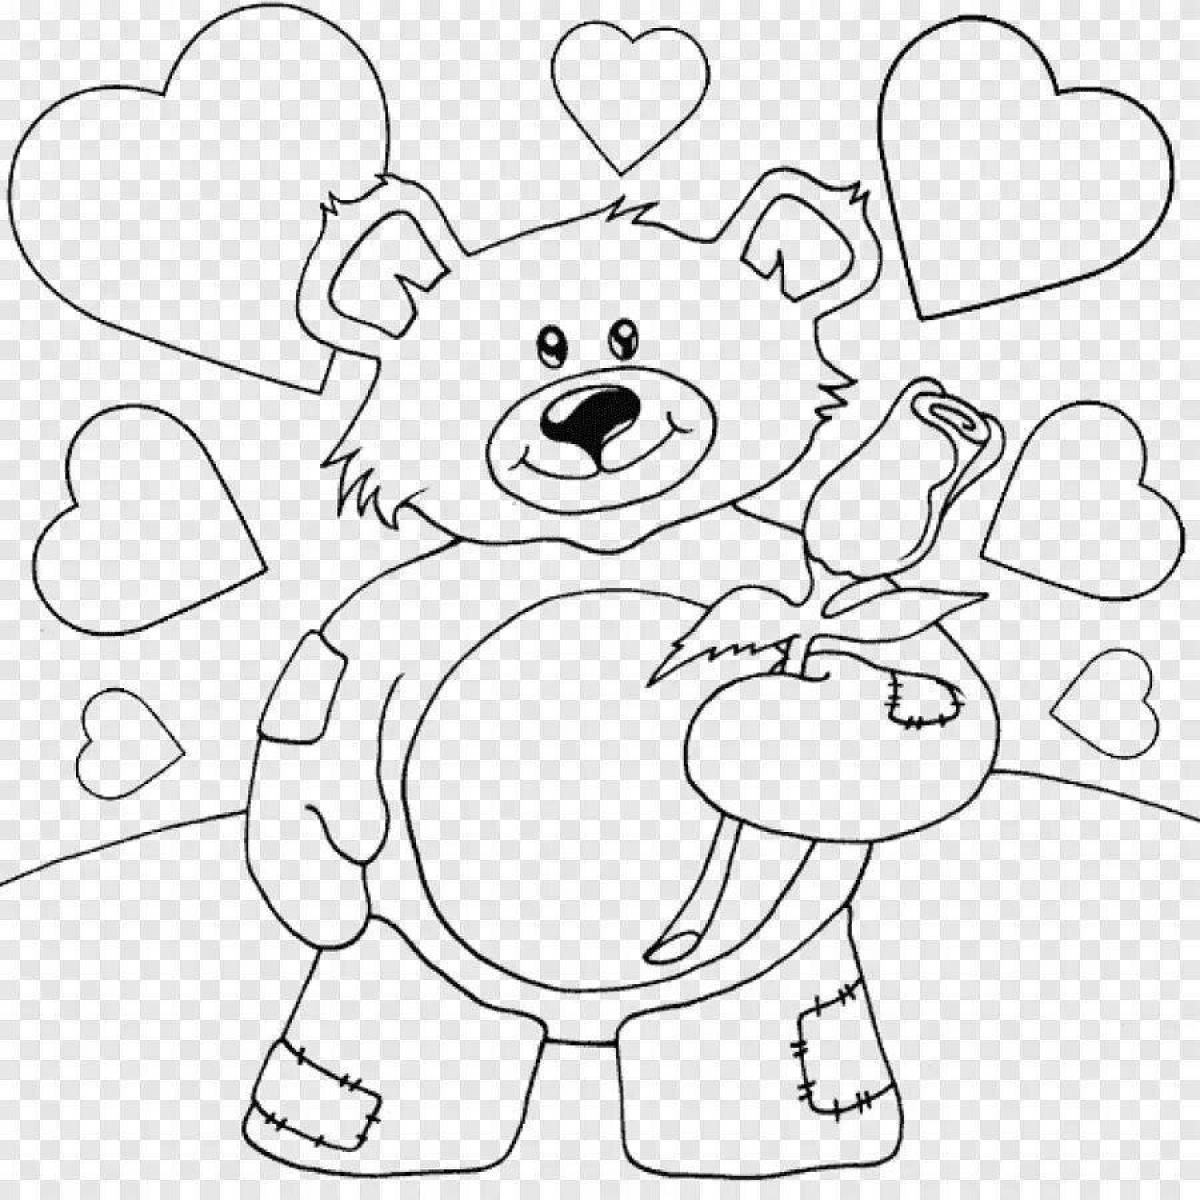 Affectionate teddy bear with a heart coloring book